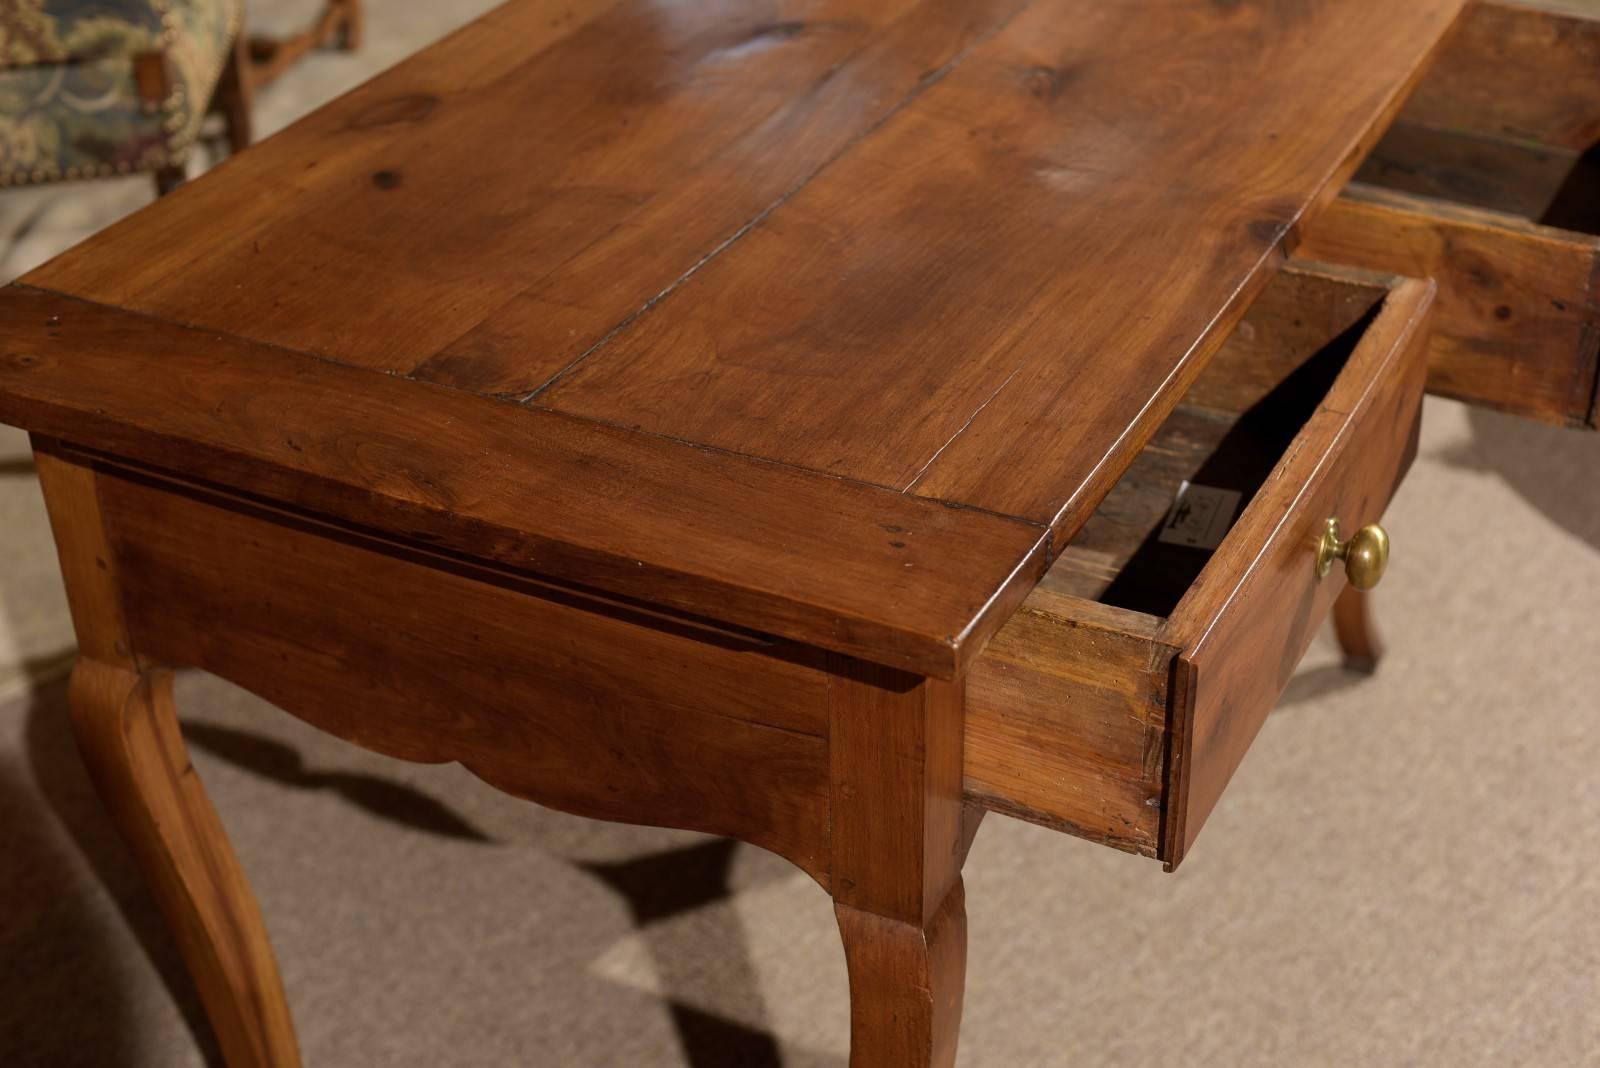 19th Century Cherry Louis XV Style Table with Two Drawers, circa 1820 For Sale 4